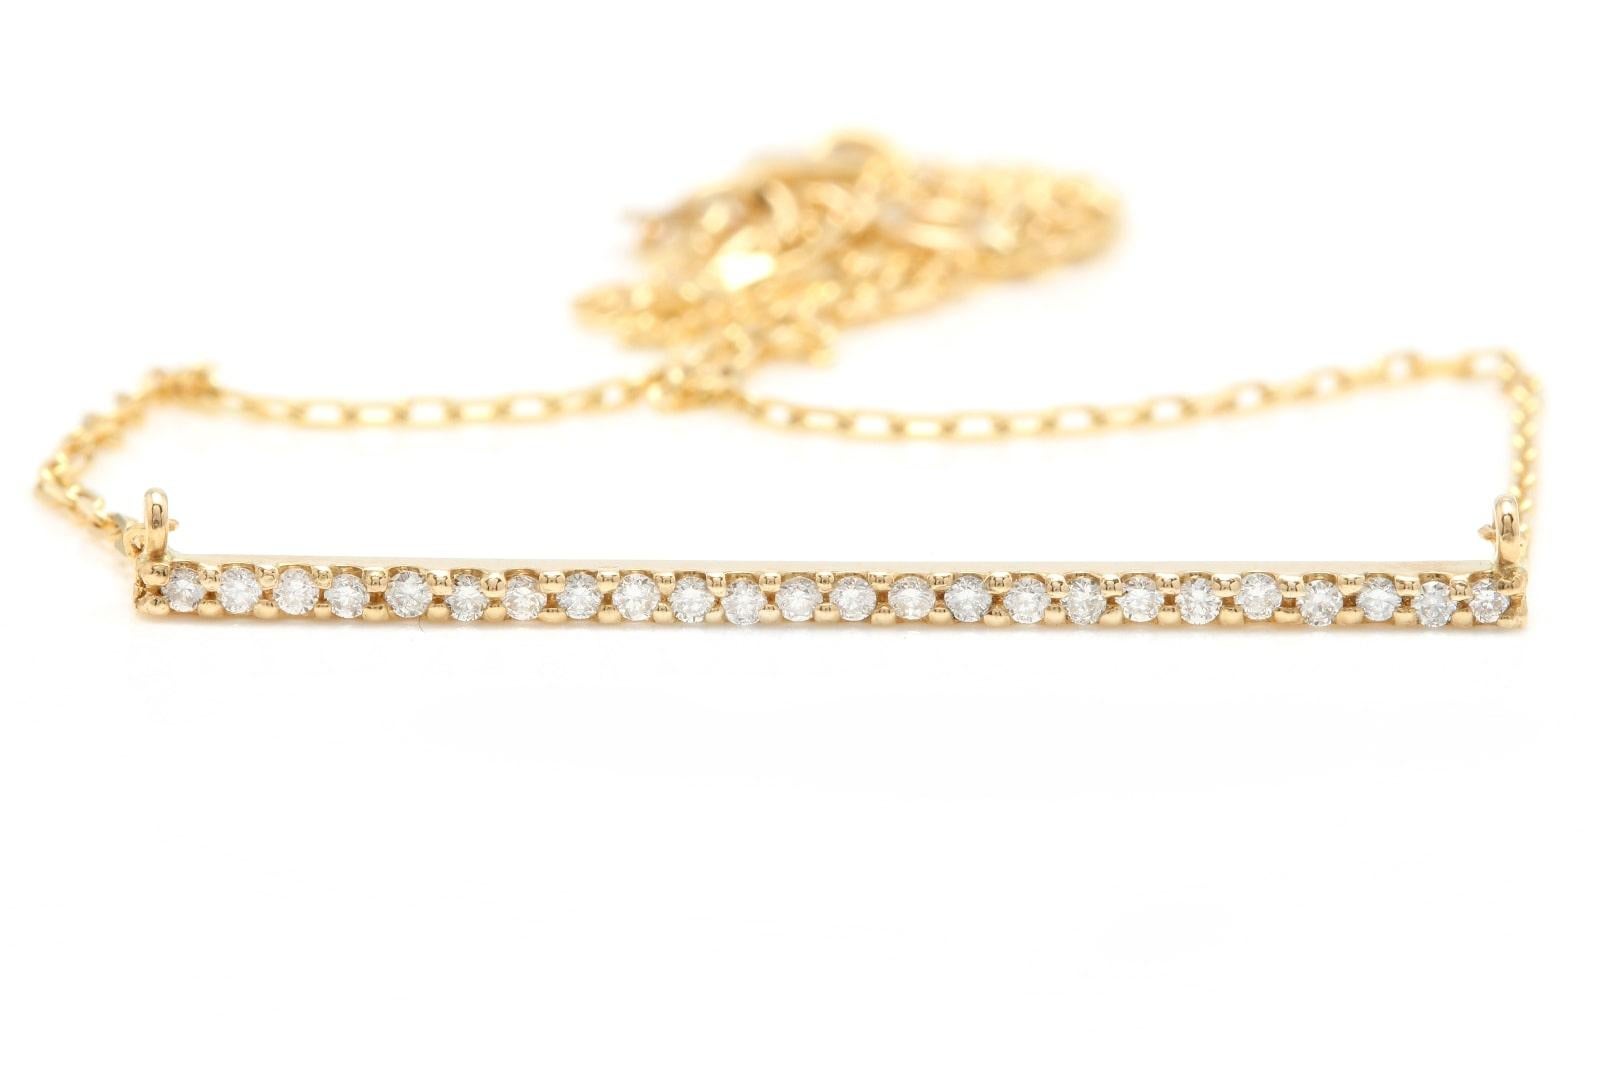 0.25Ct Splendid 14K Solid Yellow Gold Bar Necklace

Amazing looking piece! 

Stamped: 14k

Total Natural Round Diamond Weight is: Approx. 0.25 Carats (G-H / SI1-SI2)

Chain Length is: 16 inches (can adjusted to 14